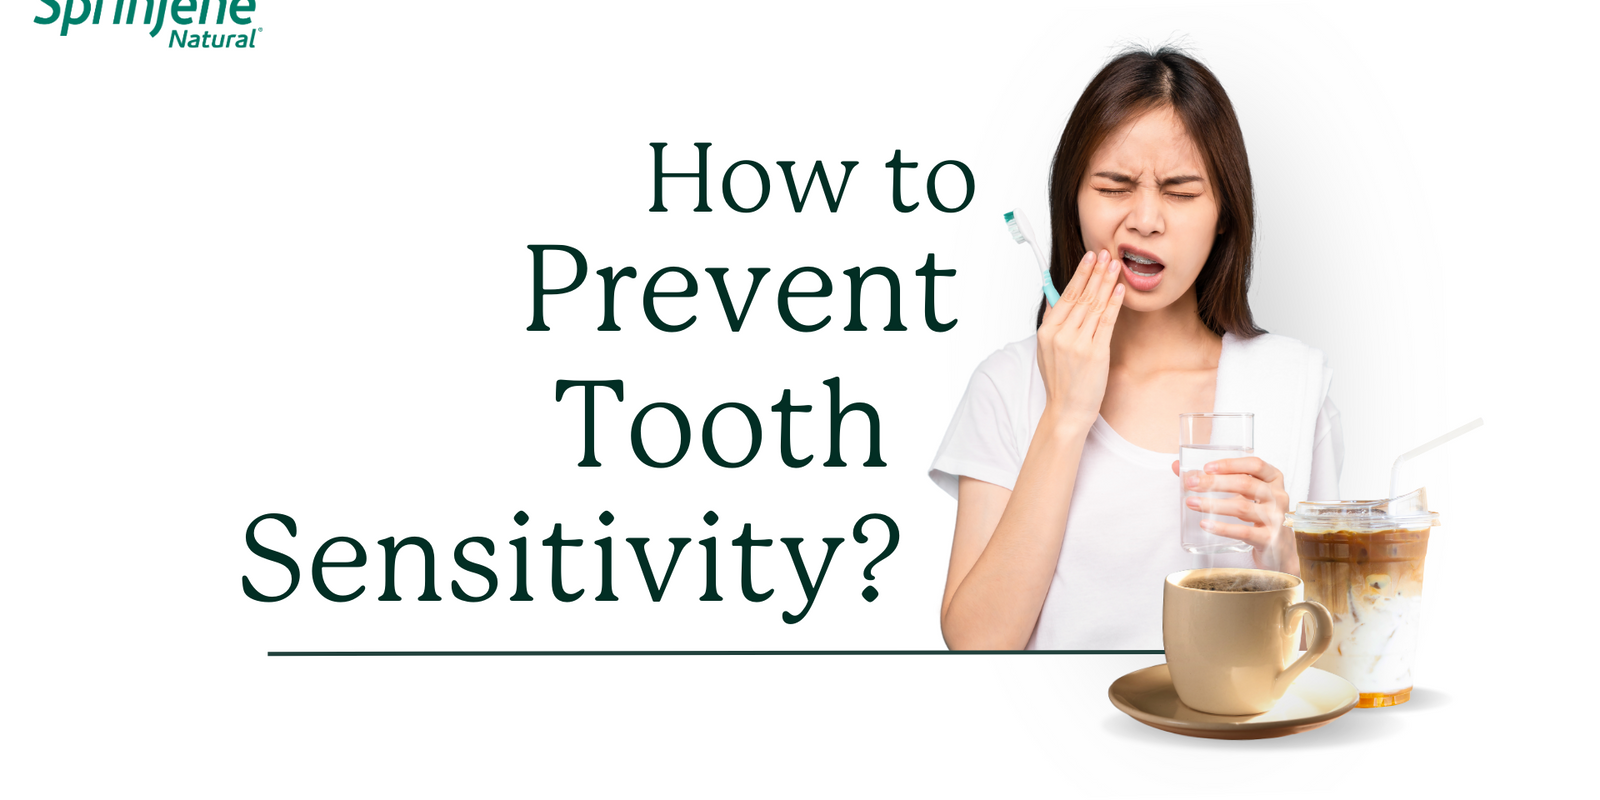 How to prevent tooth sensitivity?